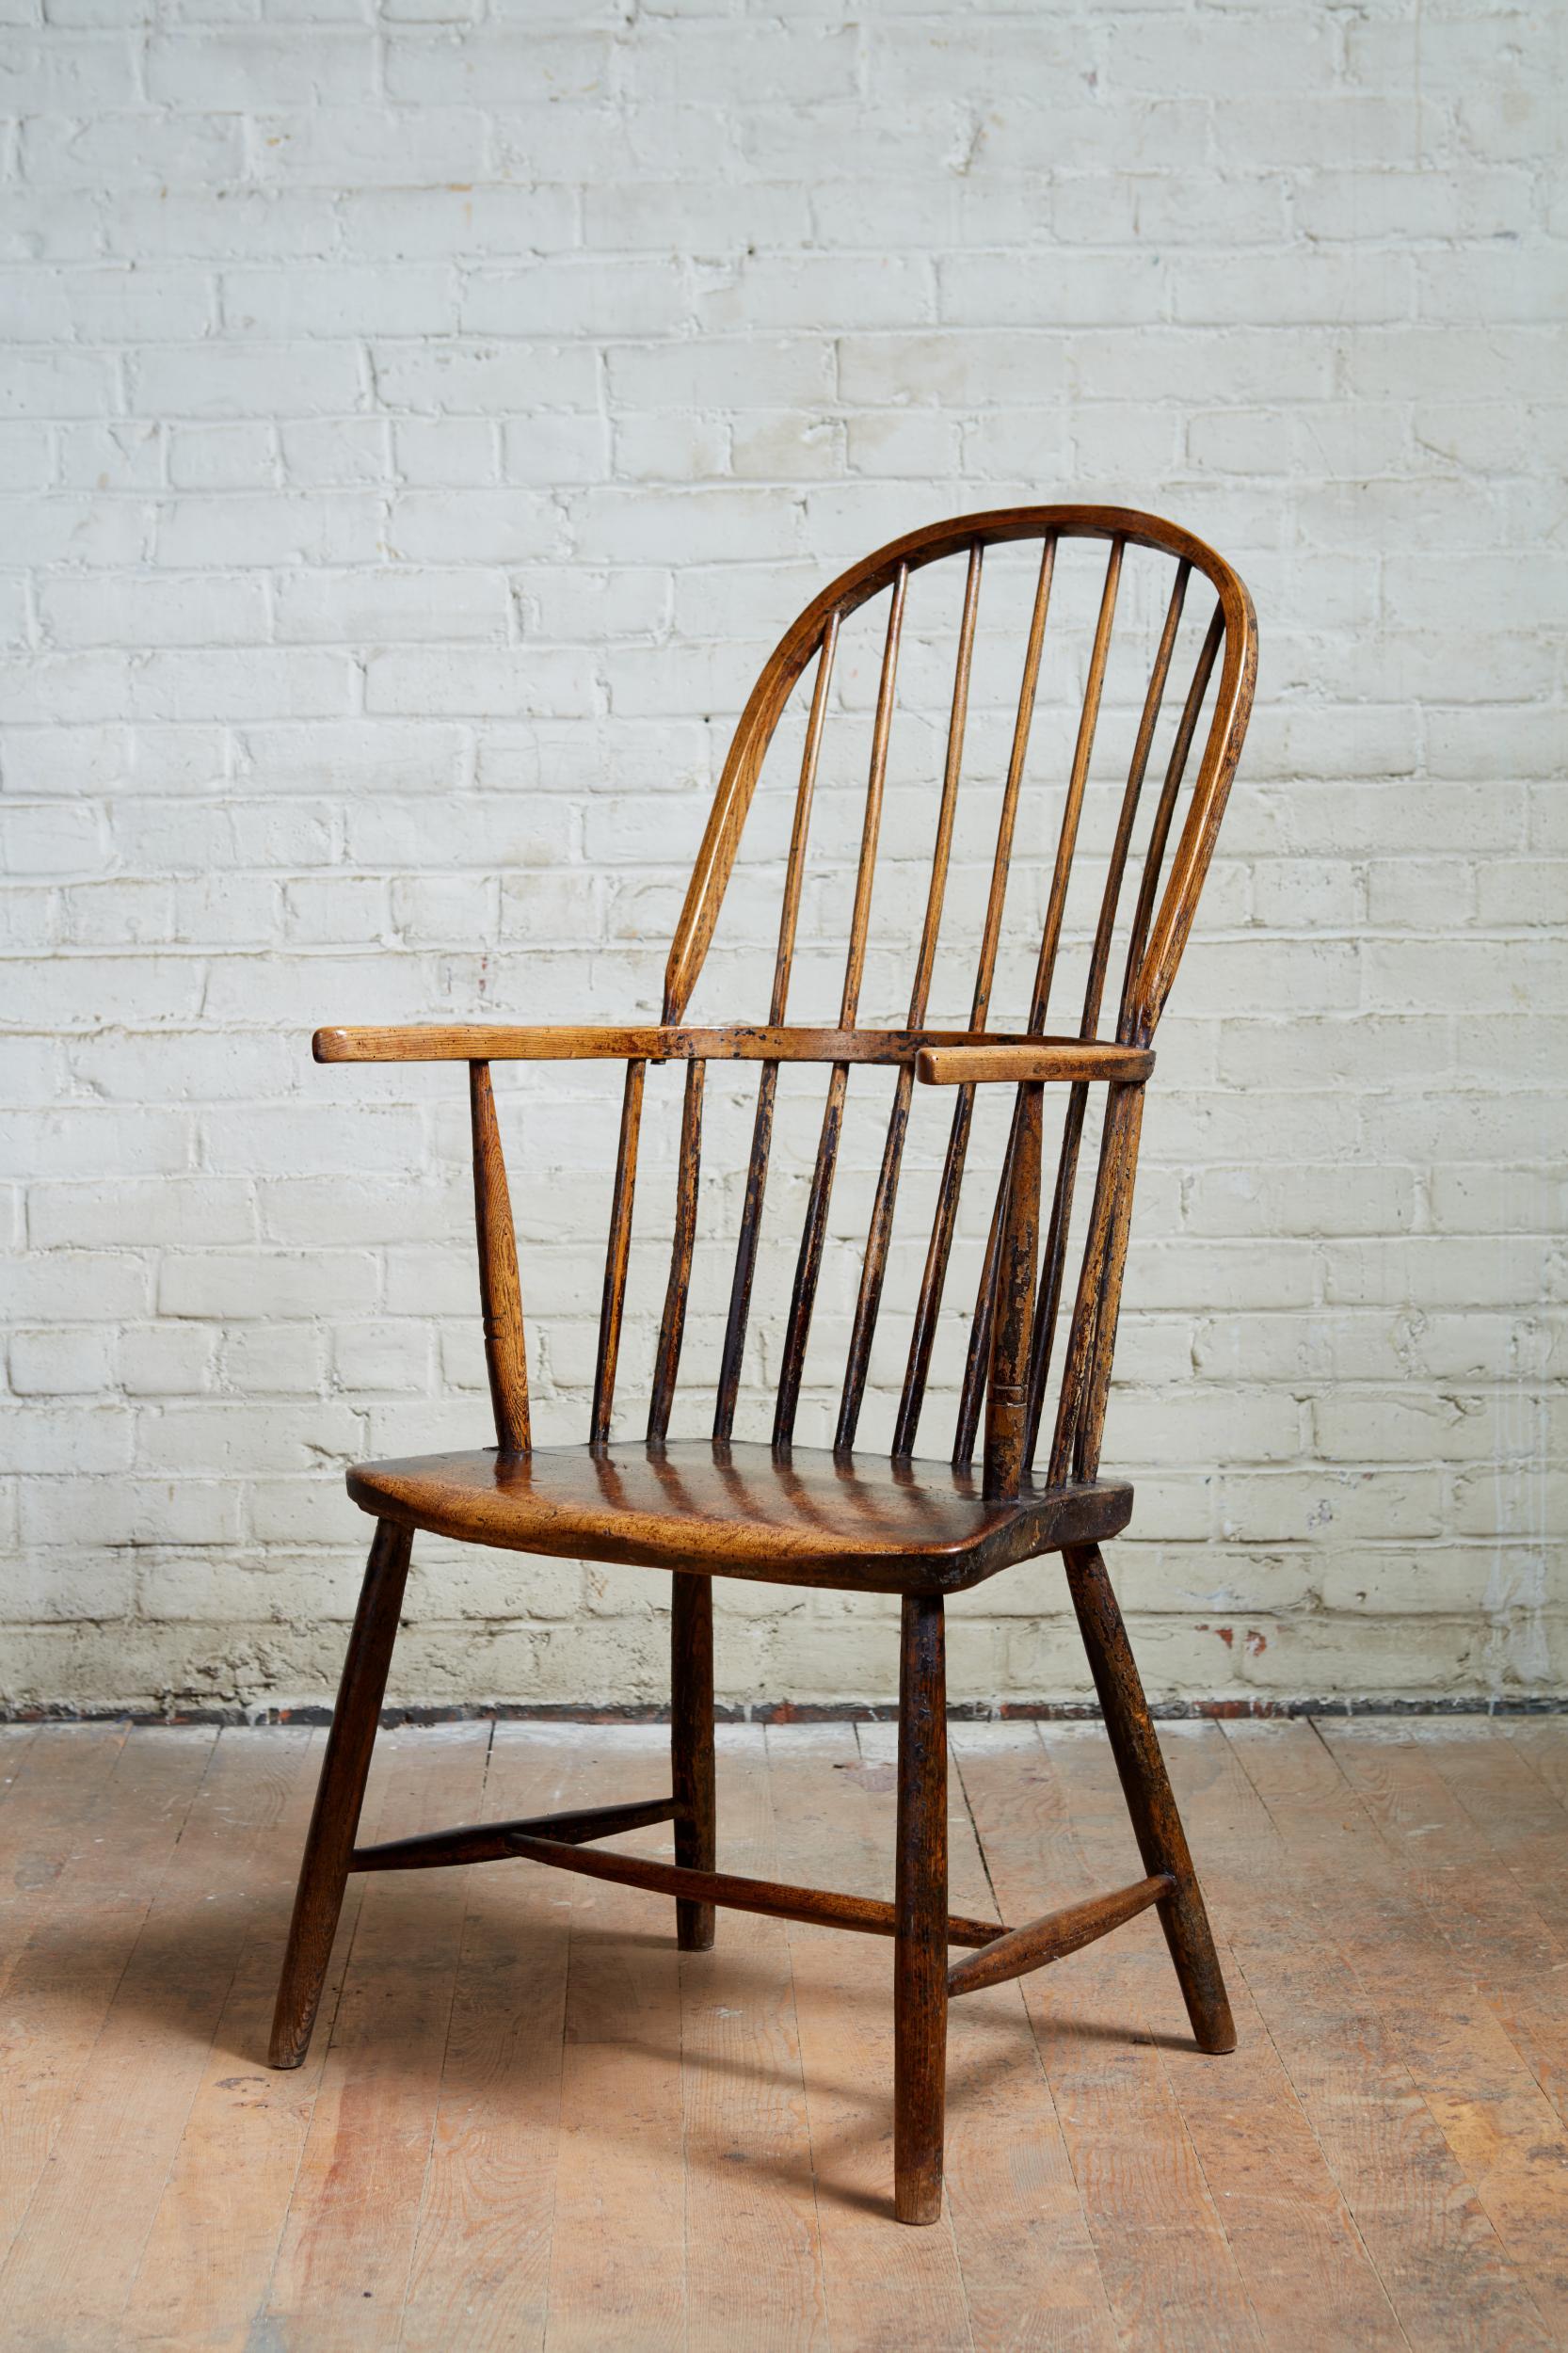 18th century English hoop back Windsor armchair, probably West Country, having tall hoop back supported by spokeshaved spindles, the continuous ashwood arm over shallow single plank sycamore seat, over pole legs joined by 